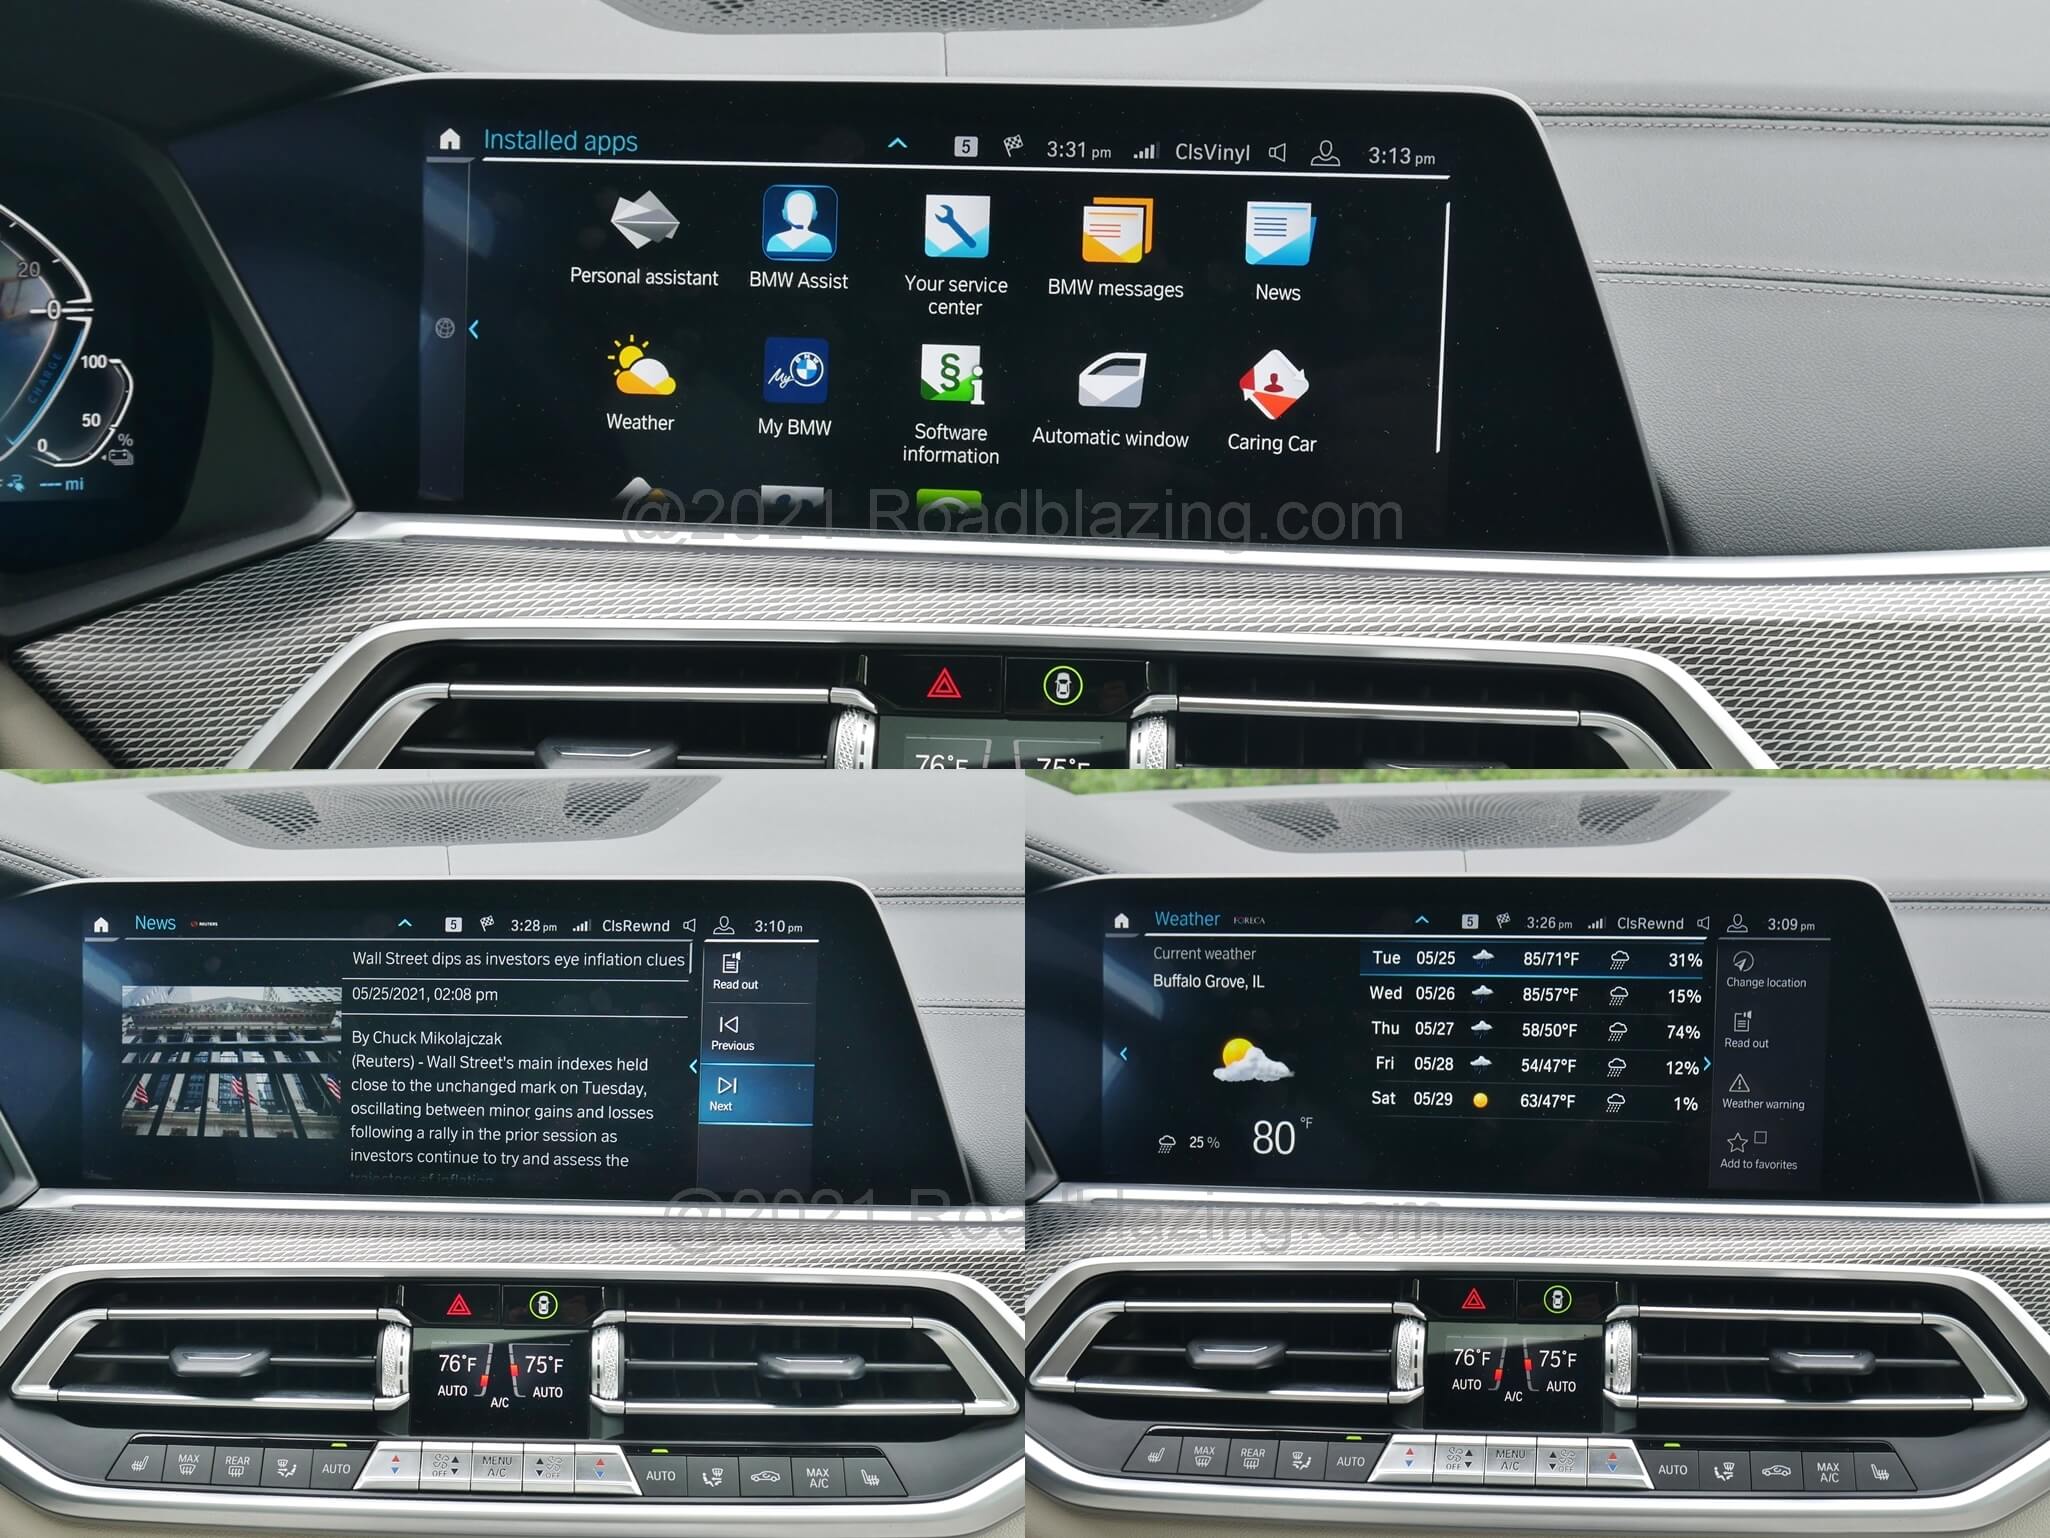 2021 BMW X5 xDrive 45e: included BMW apps can be selected for 12.3" I-Drive home infotainment screen panes